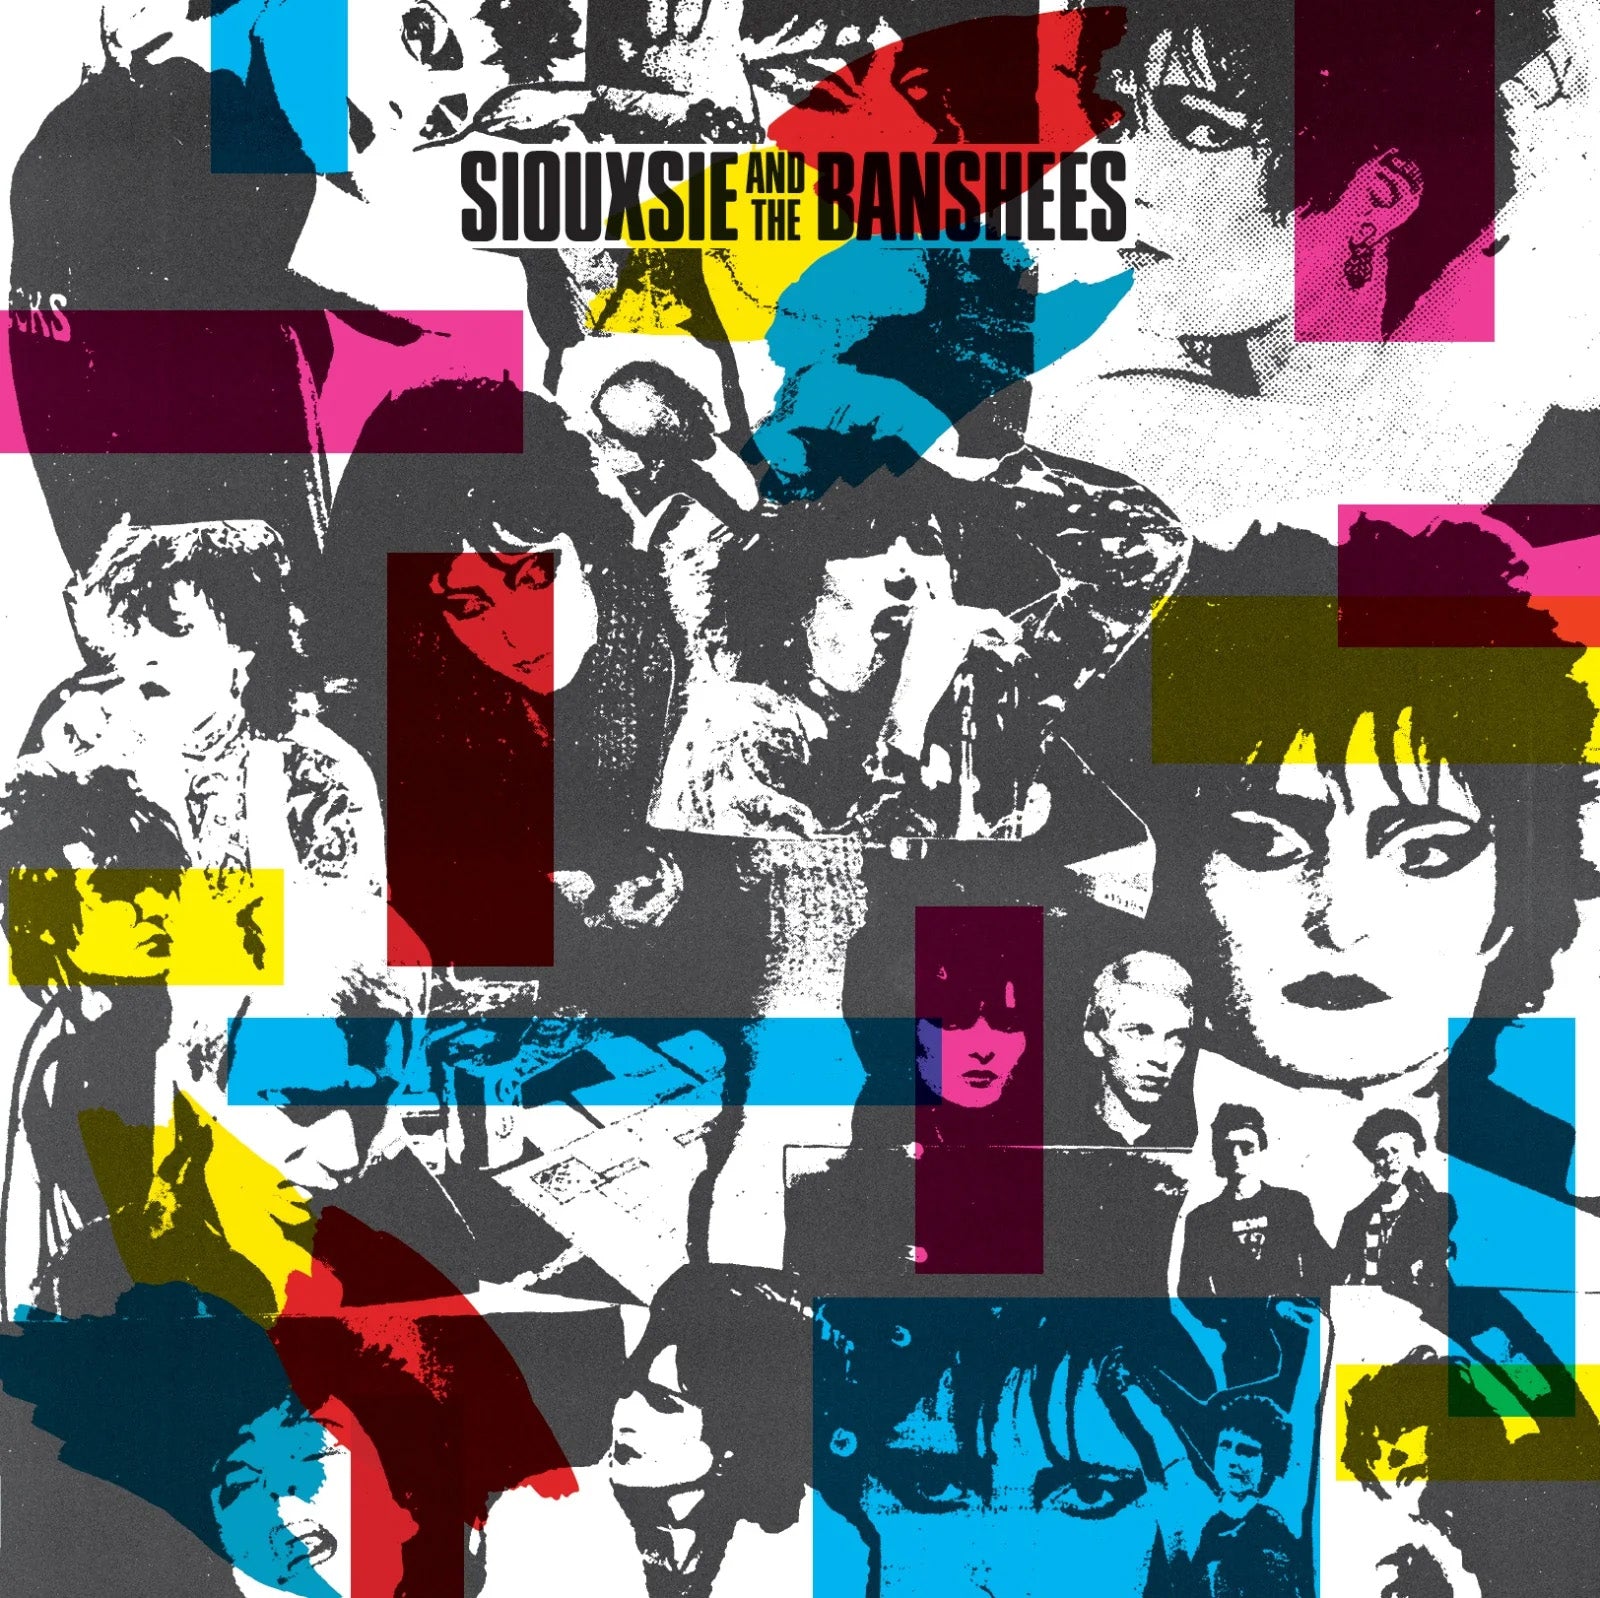 SIOUXSIE AND THE BANSHEES - 1977 to 78 Demos